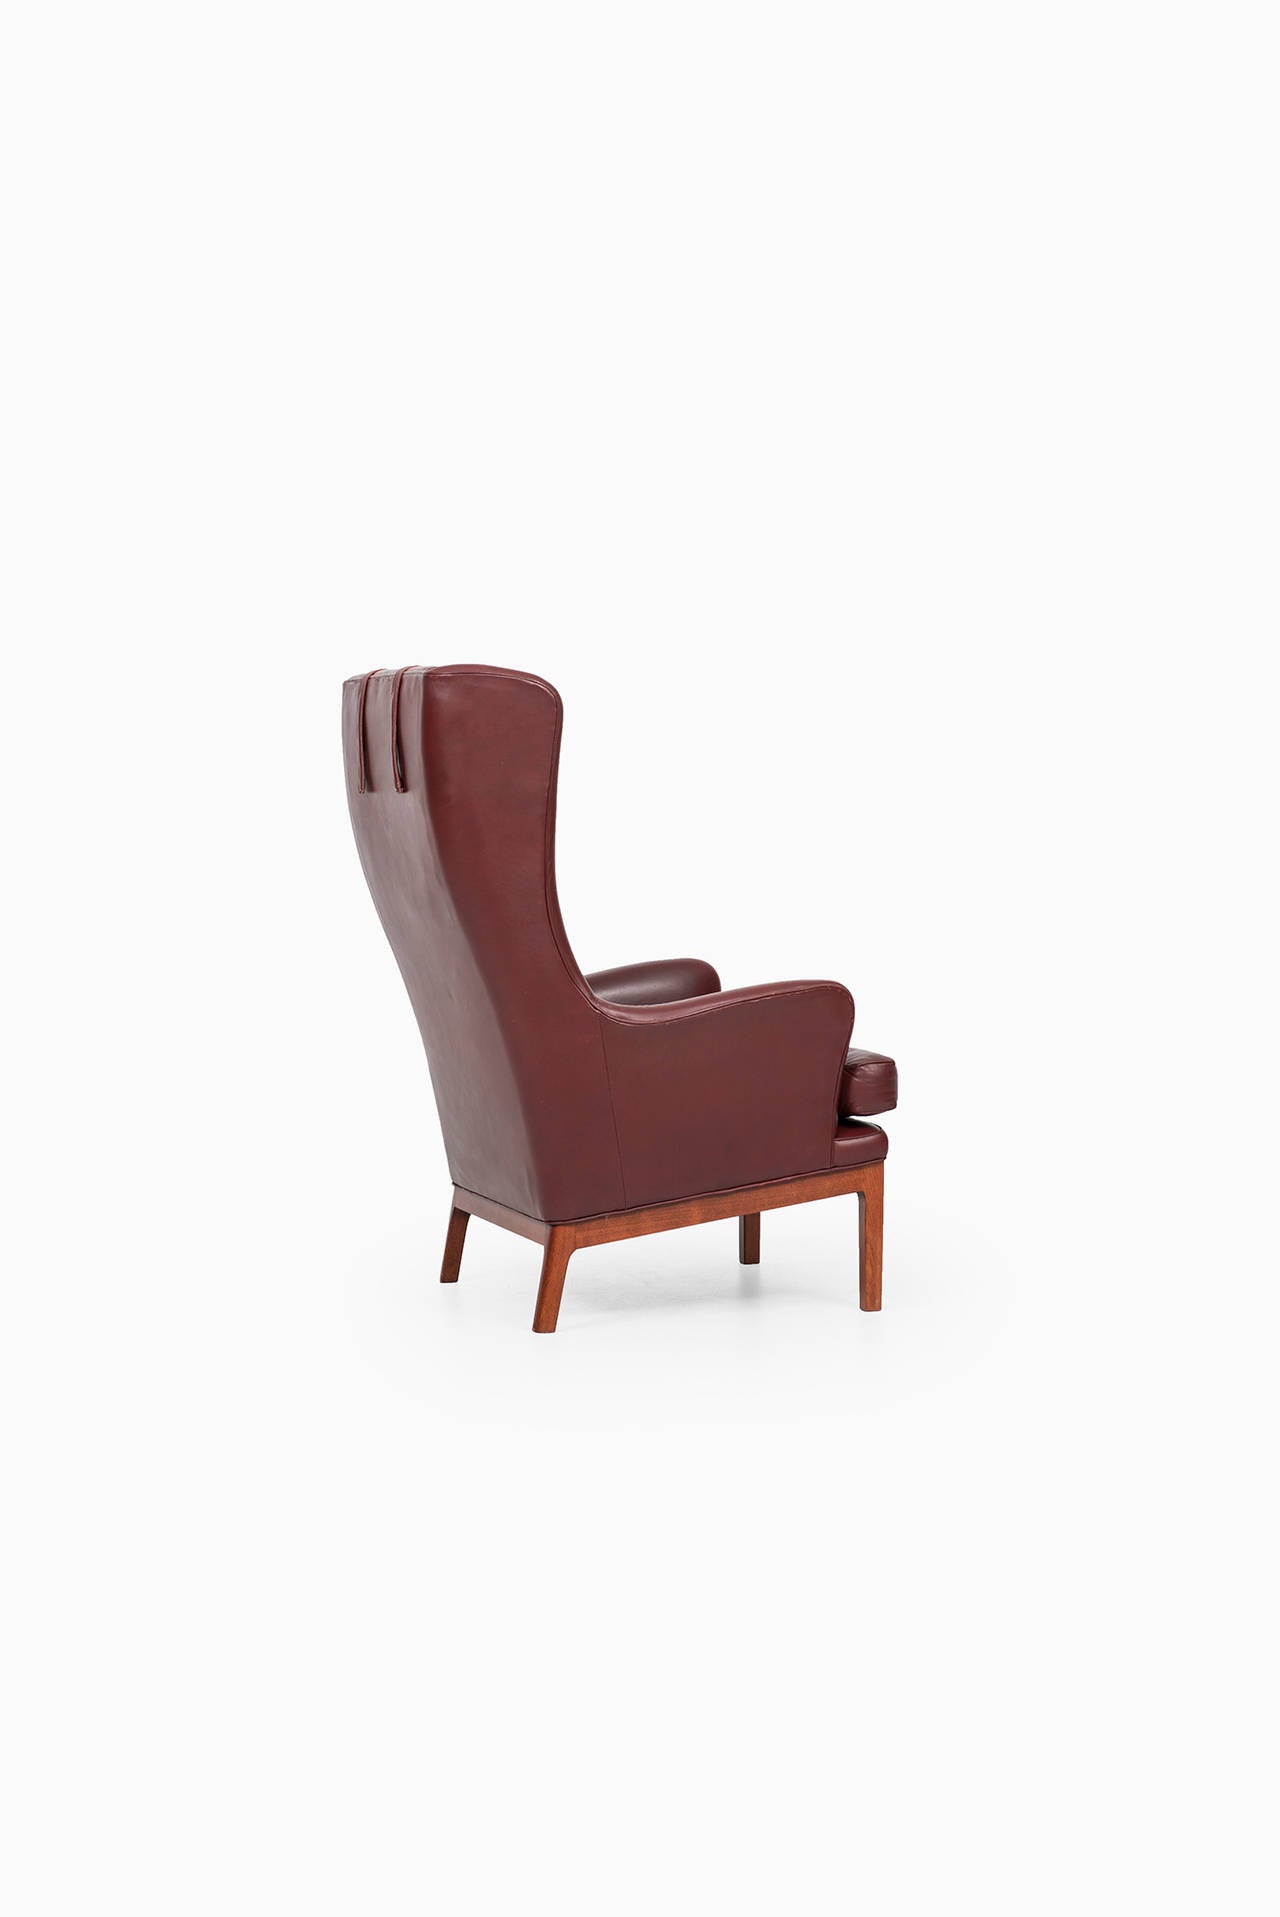 Beech Arne Norell Wingback Easy Chairs in Dark Red Leather by Norell AB in Sweden